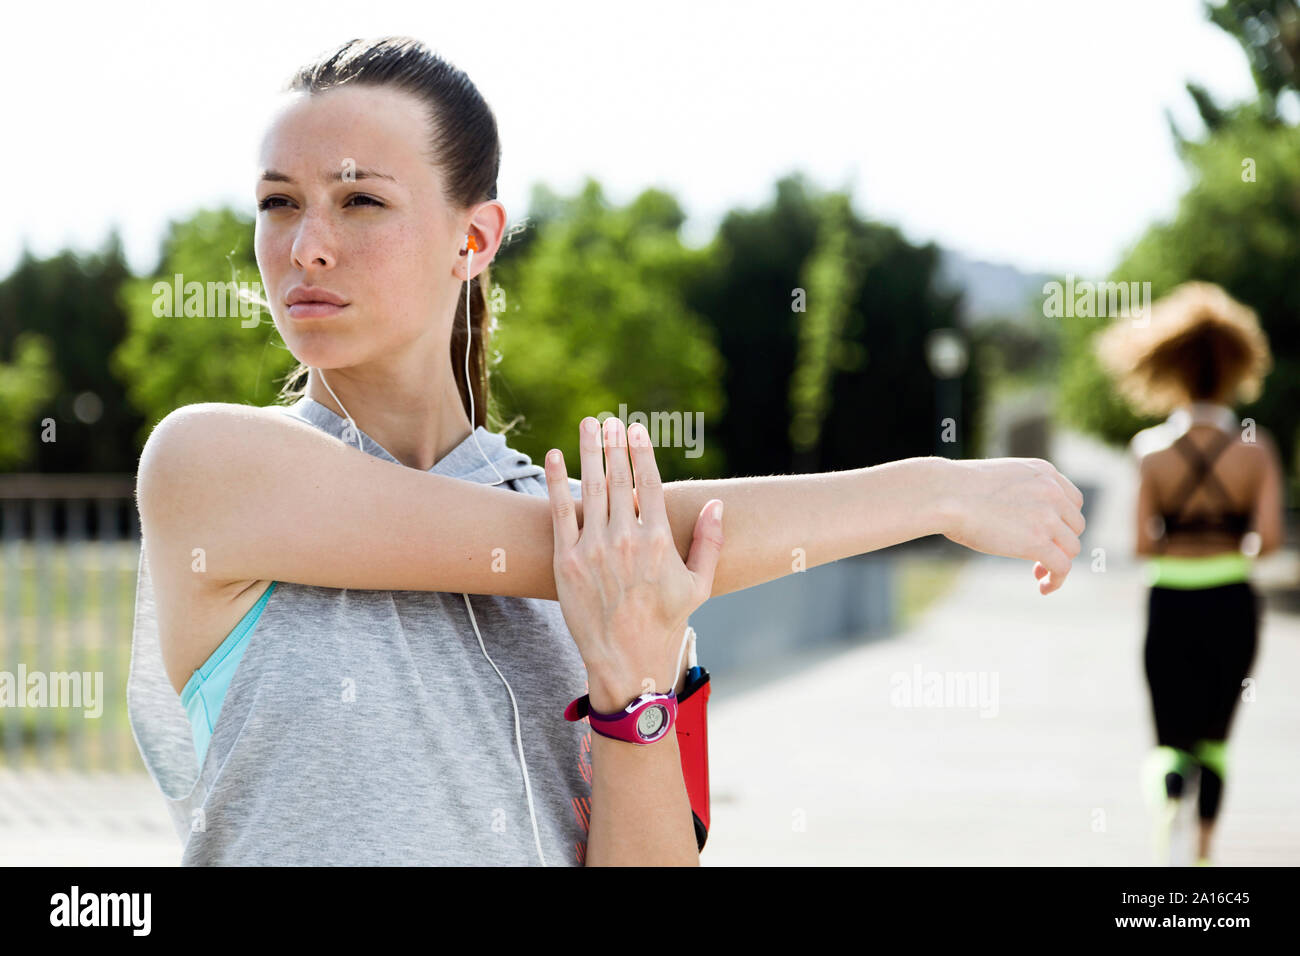 Sporty woman doing stretching exercice Banque D'Images